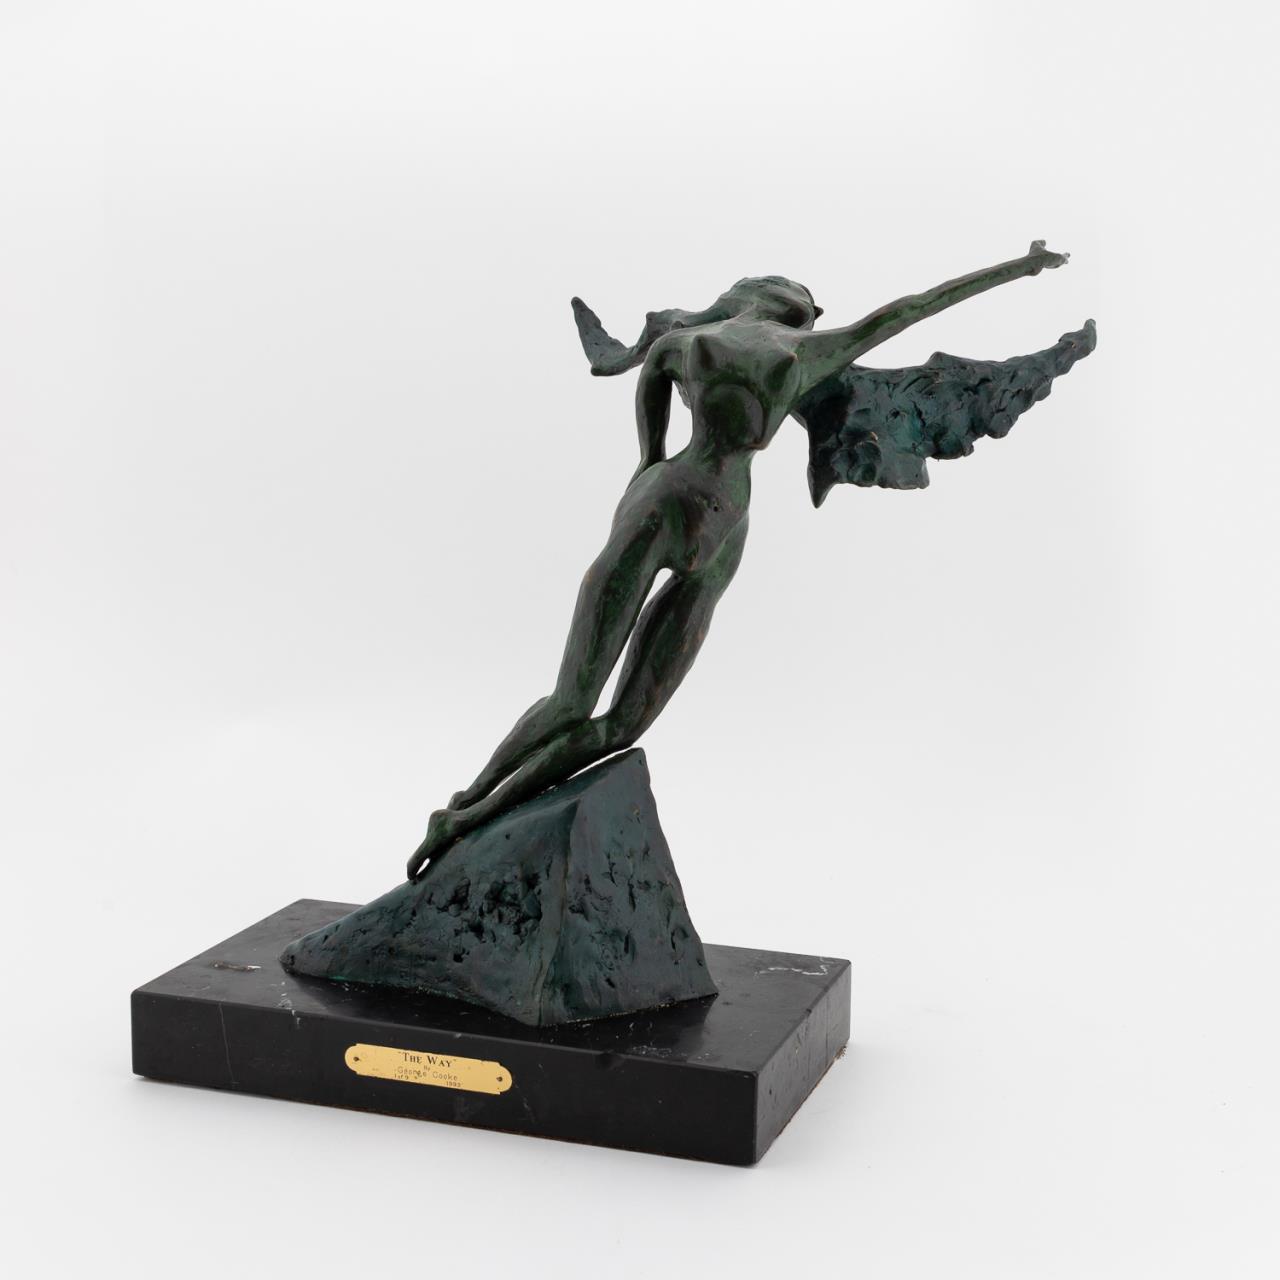 GEORGE COOKE "THE WAY" BRONZE FIGURAL